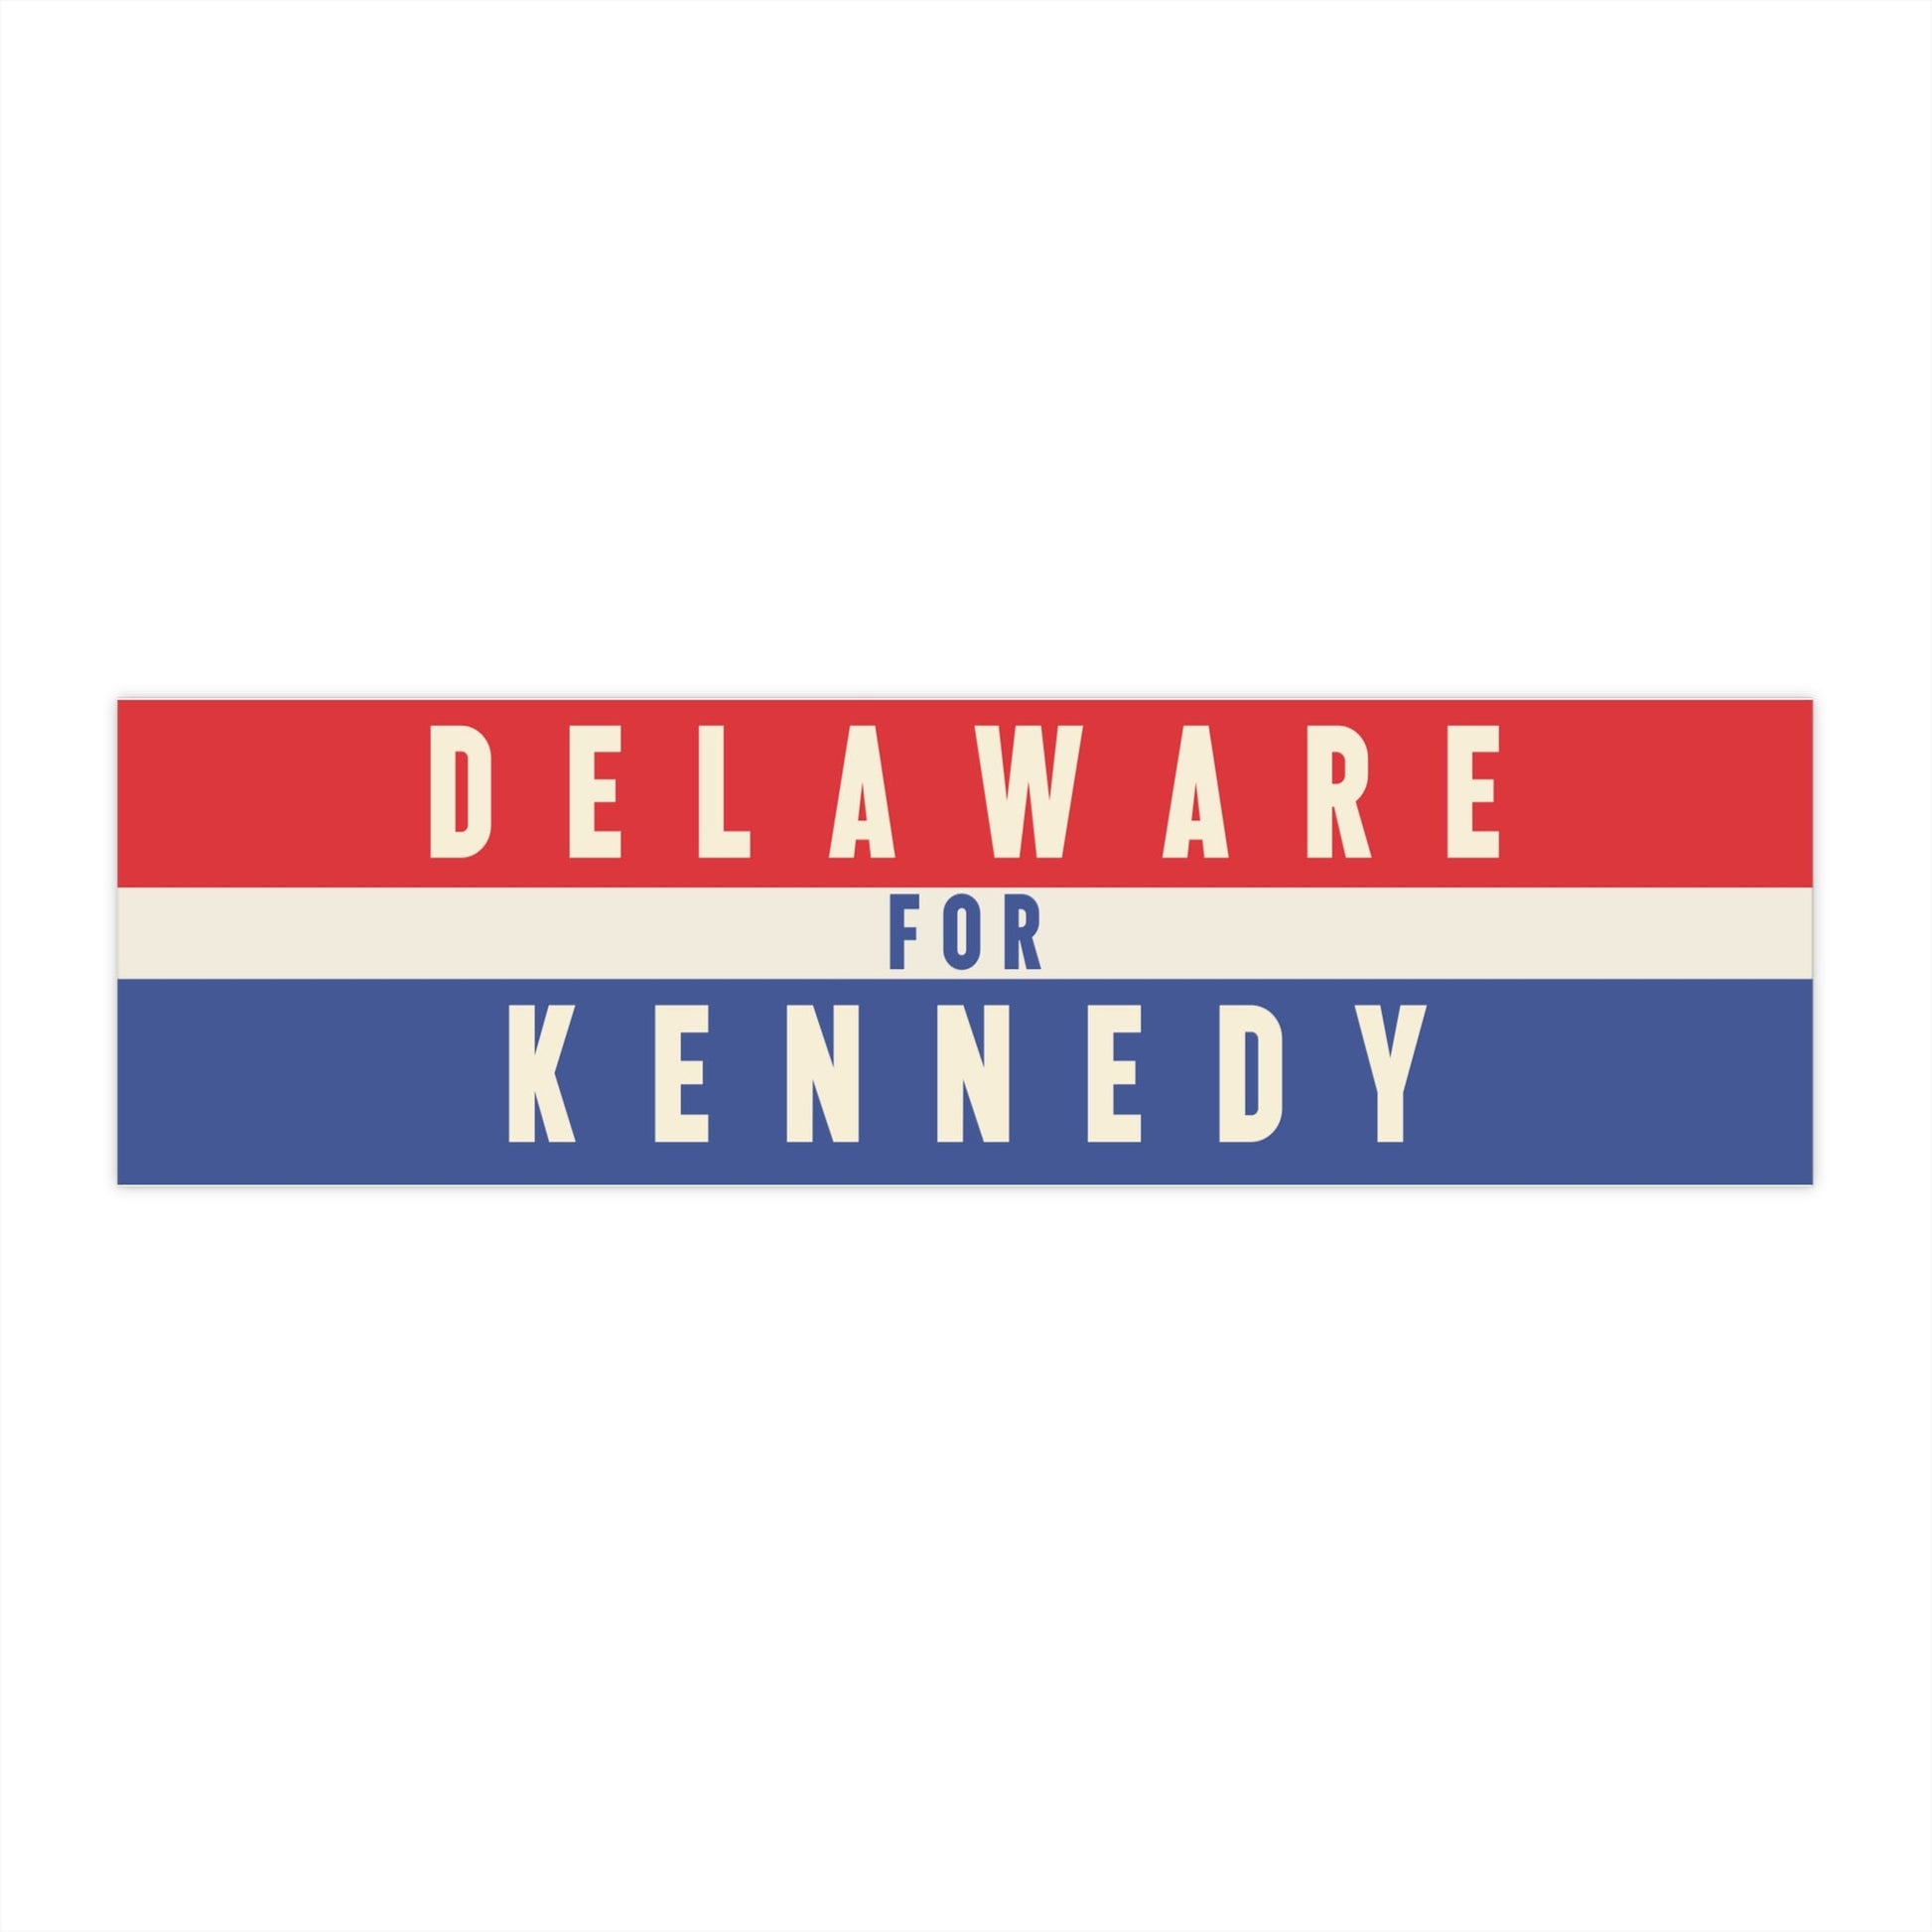 Delaware for Kennedy Bumper Sticker - TEAM KENNEDY. All rights reserved